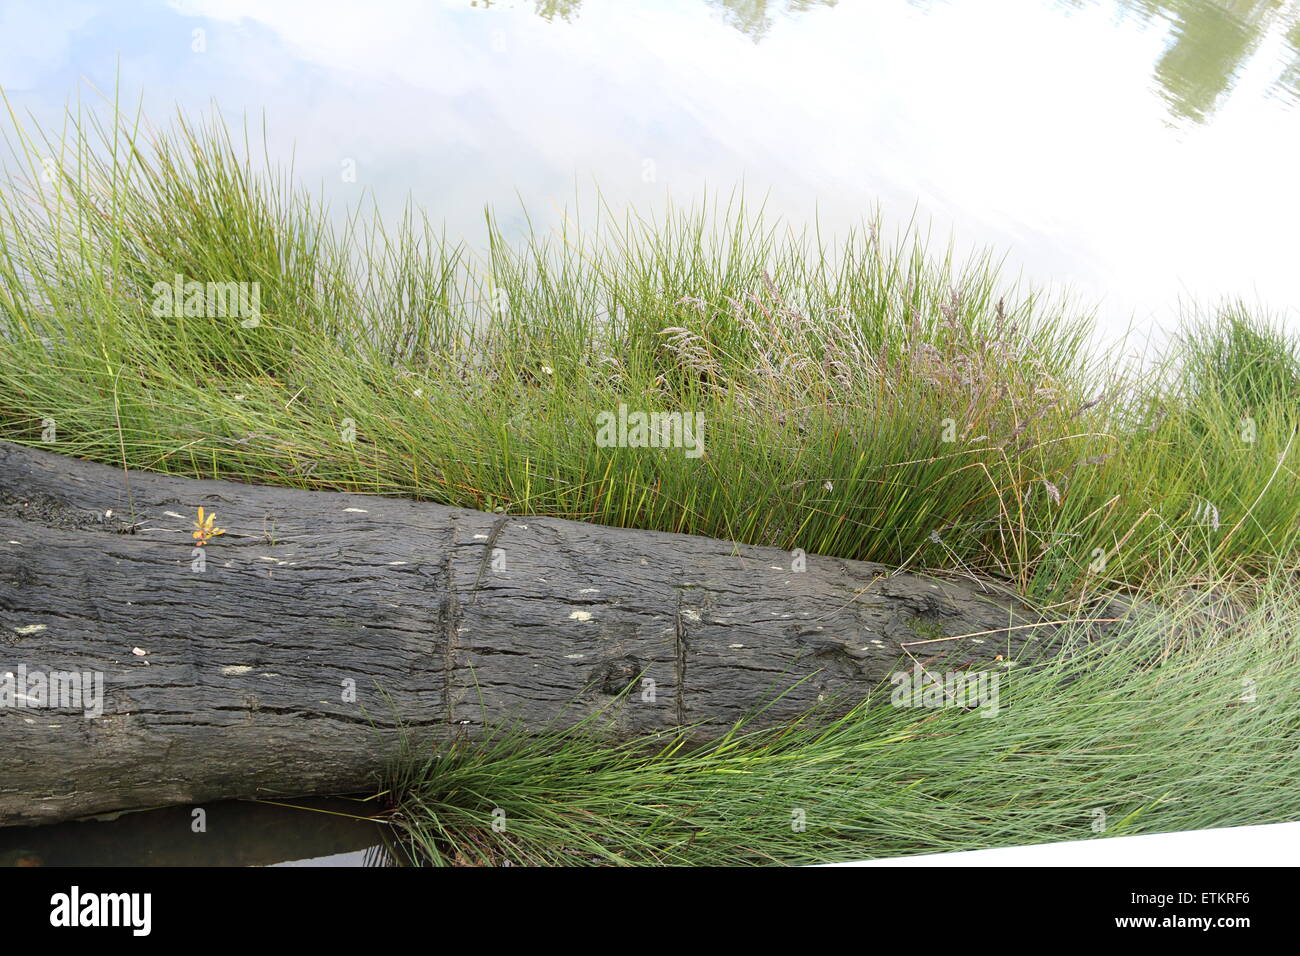 A dead log half submersed in a pool of water near tall grass Stock Photo